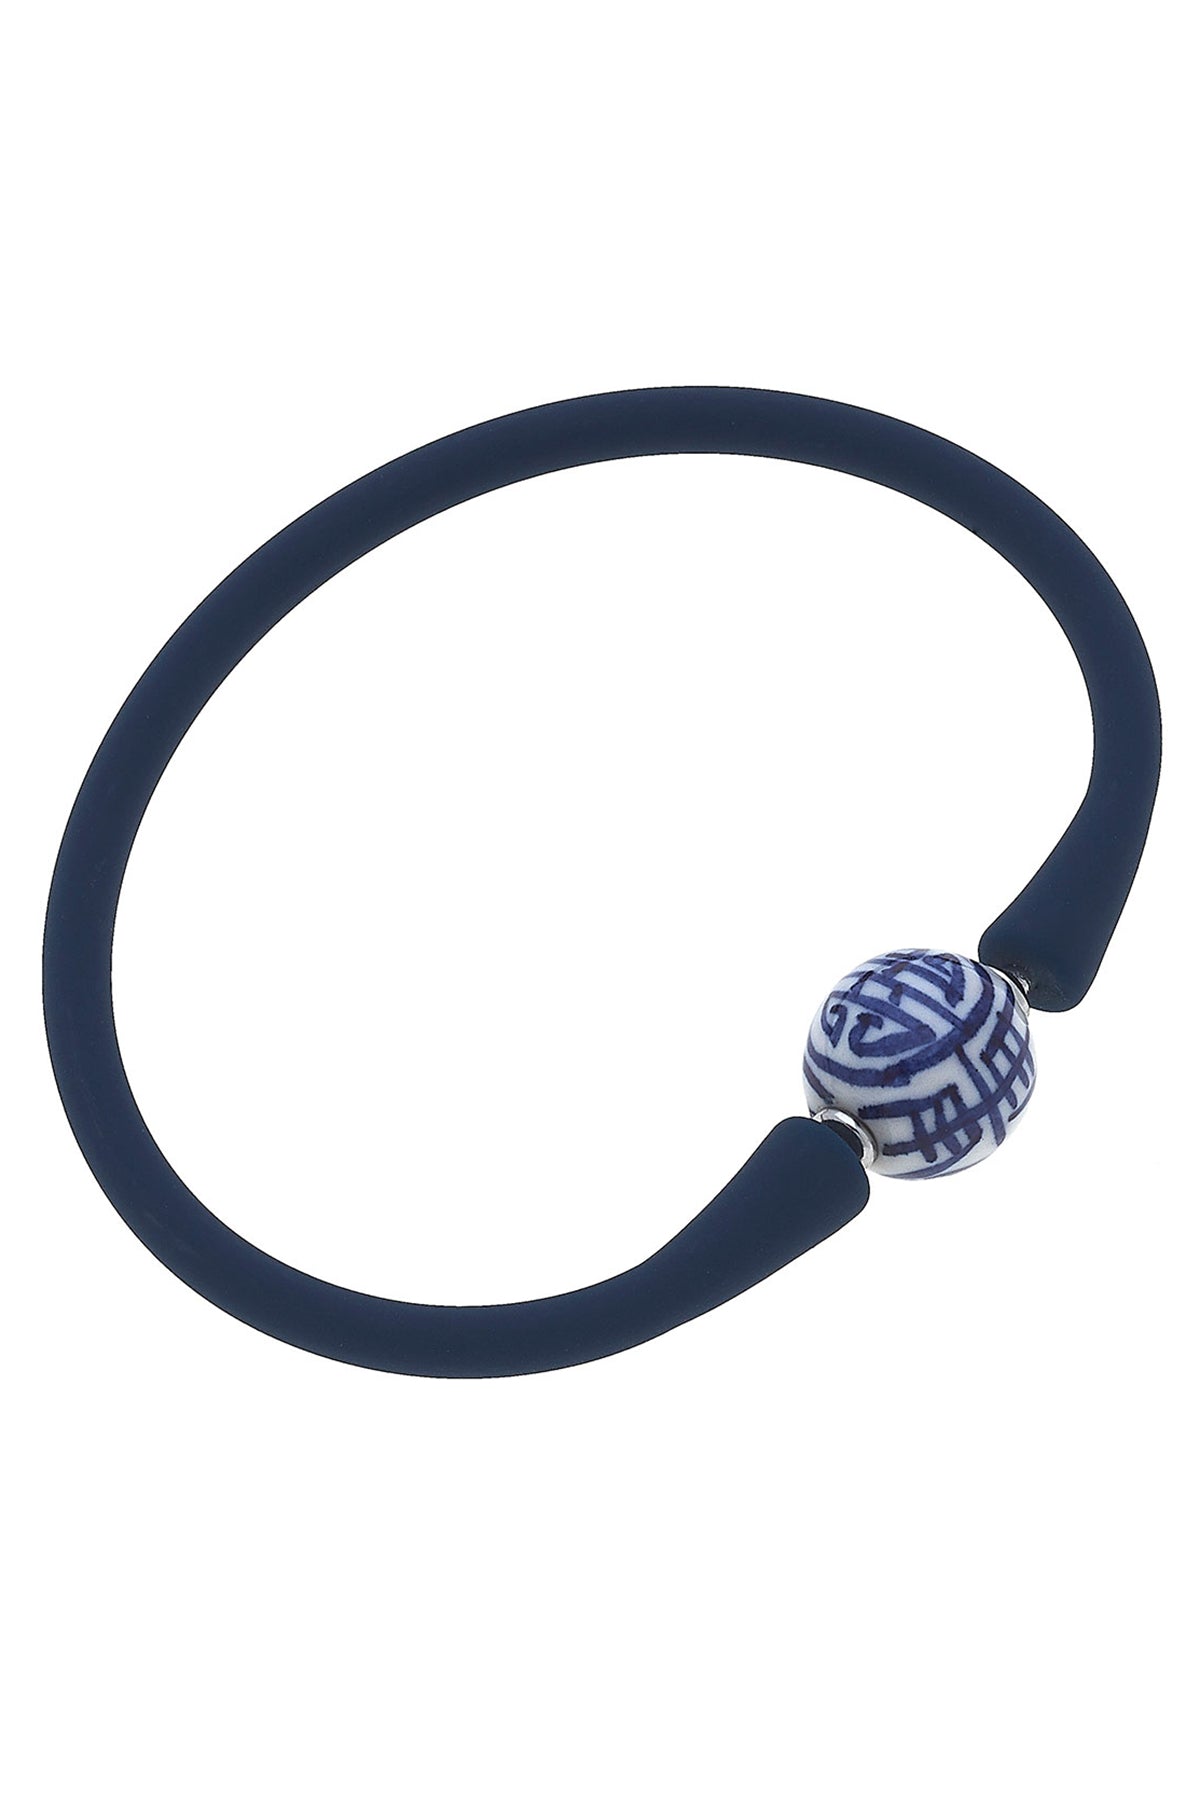 Bali Chinoiserie Bead Silicone Bracelet in Navy